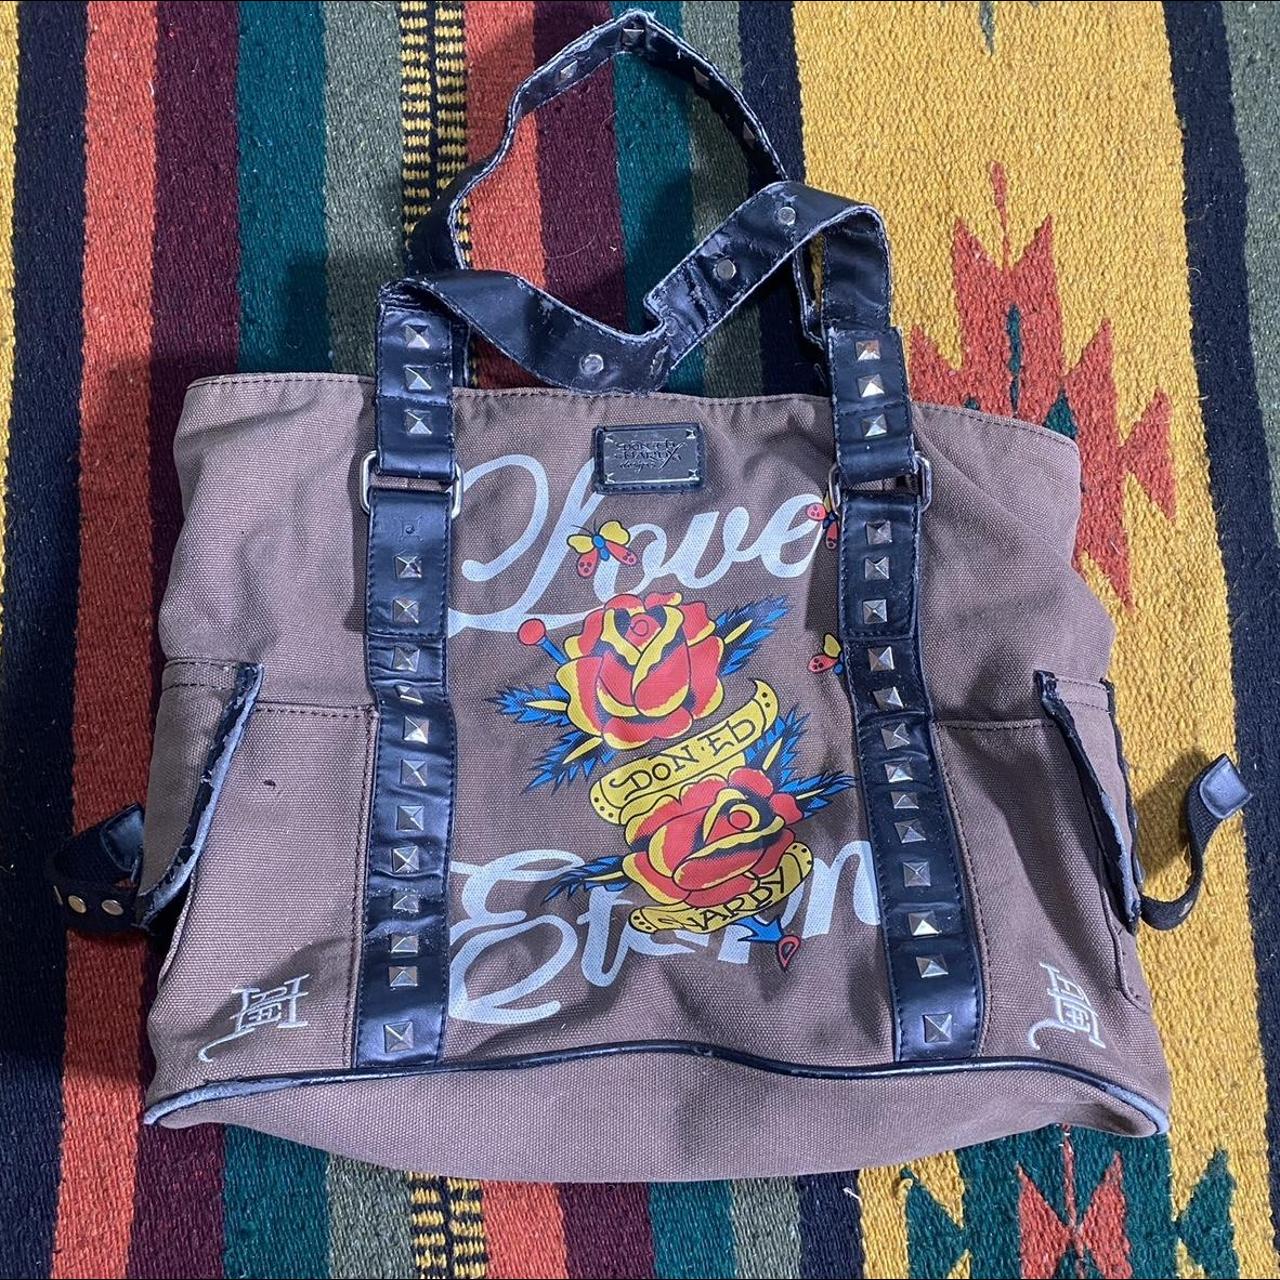 Buy Ed Hardy Purse Online In India - Etsy India